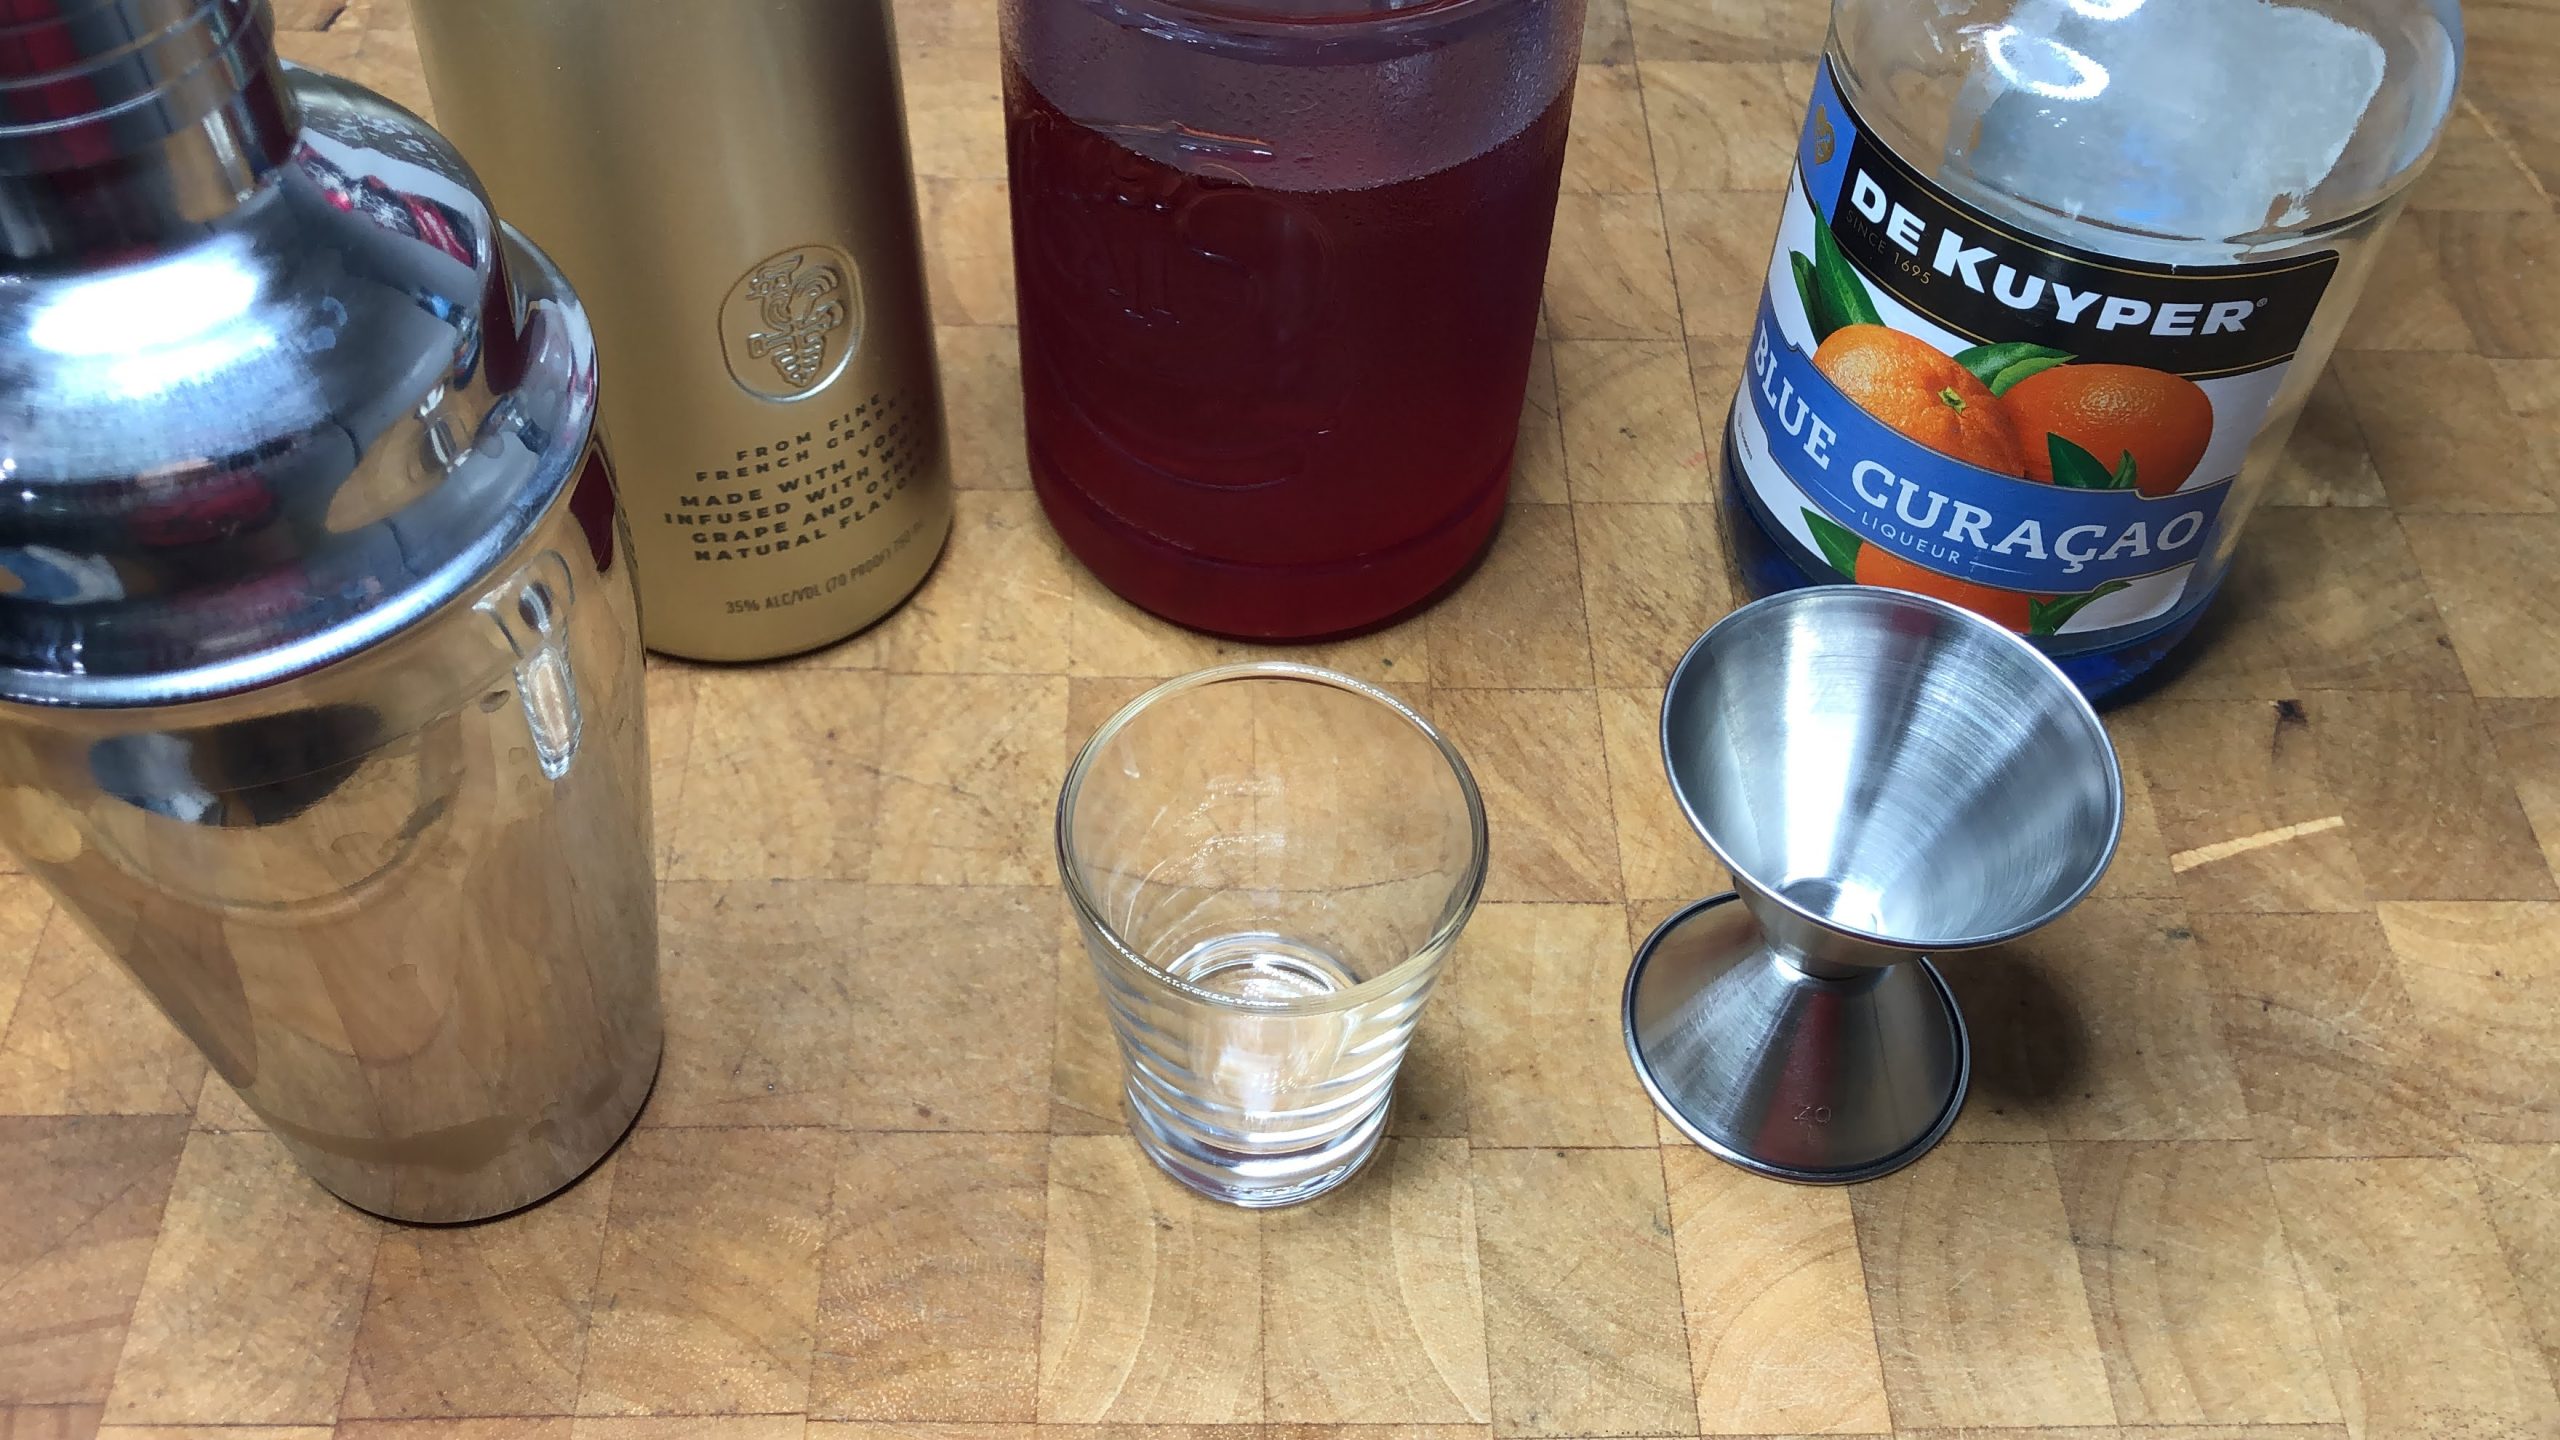 Bottles of blue curacao, grenadine and grape vodka next to shaker, shot glass and jigger.